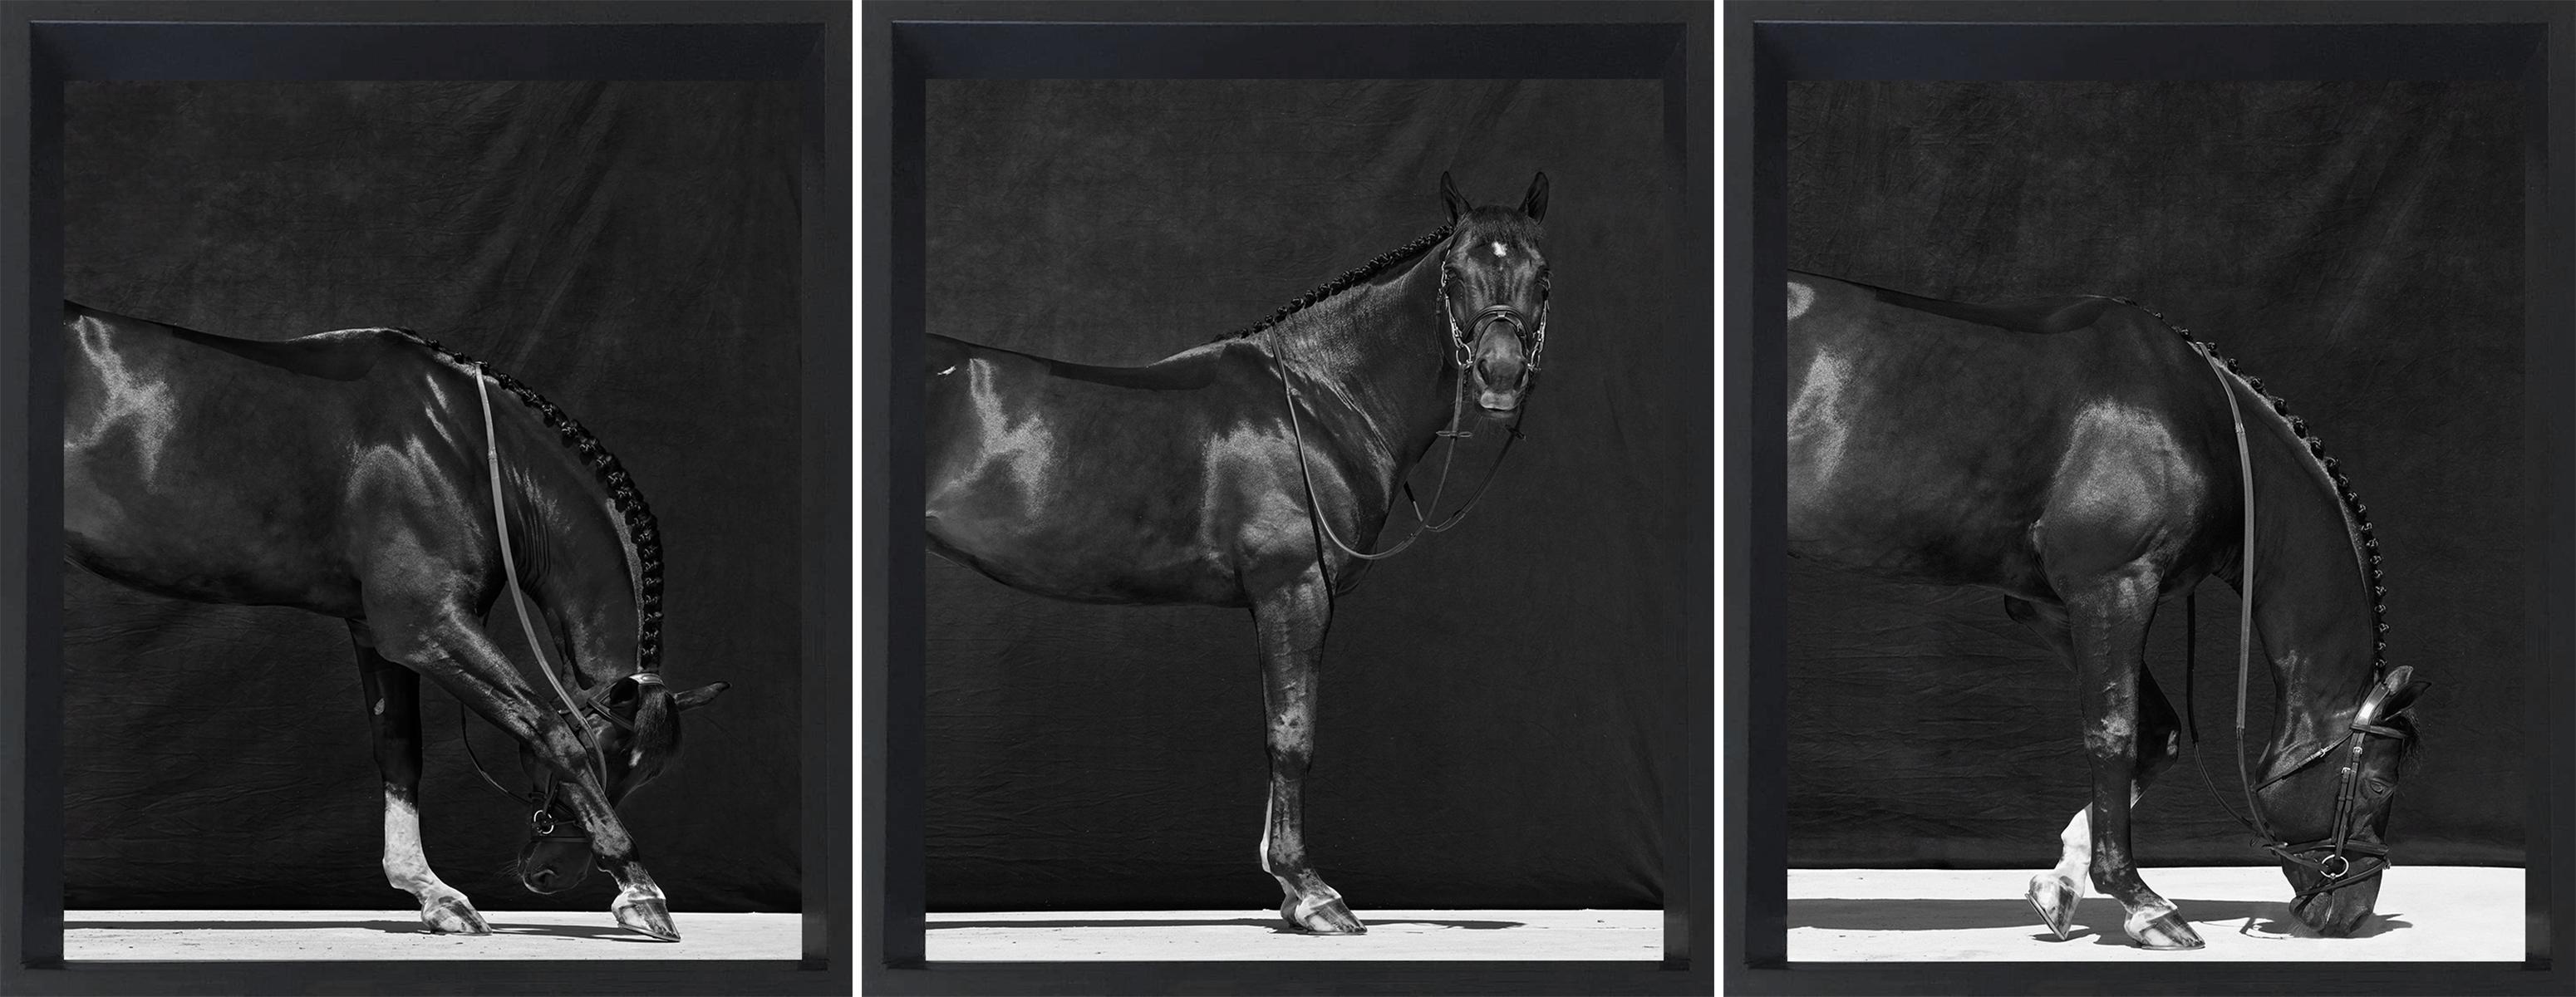 Juan Lamarca Portrait Photograph - Brainpower II, III and I. Triptych. From The Horses Series